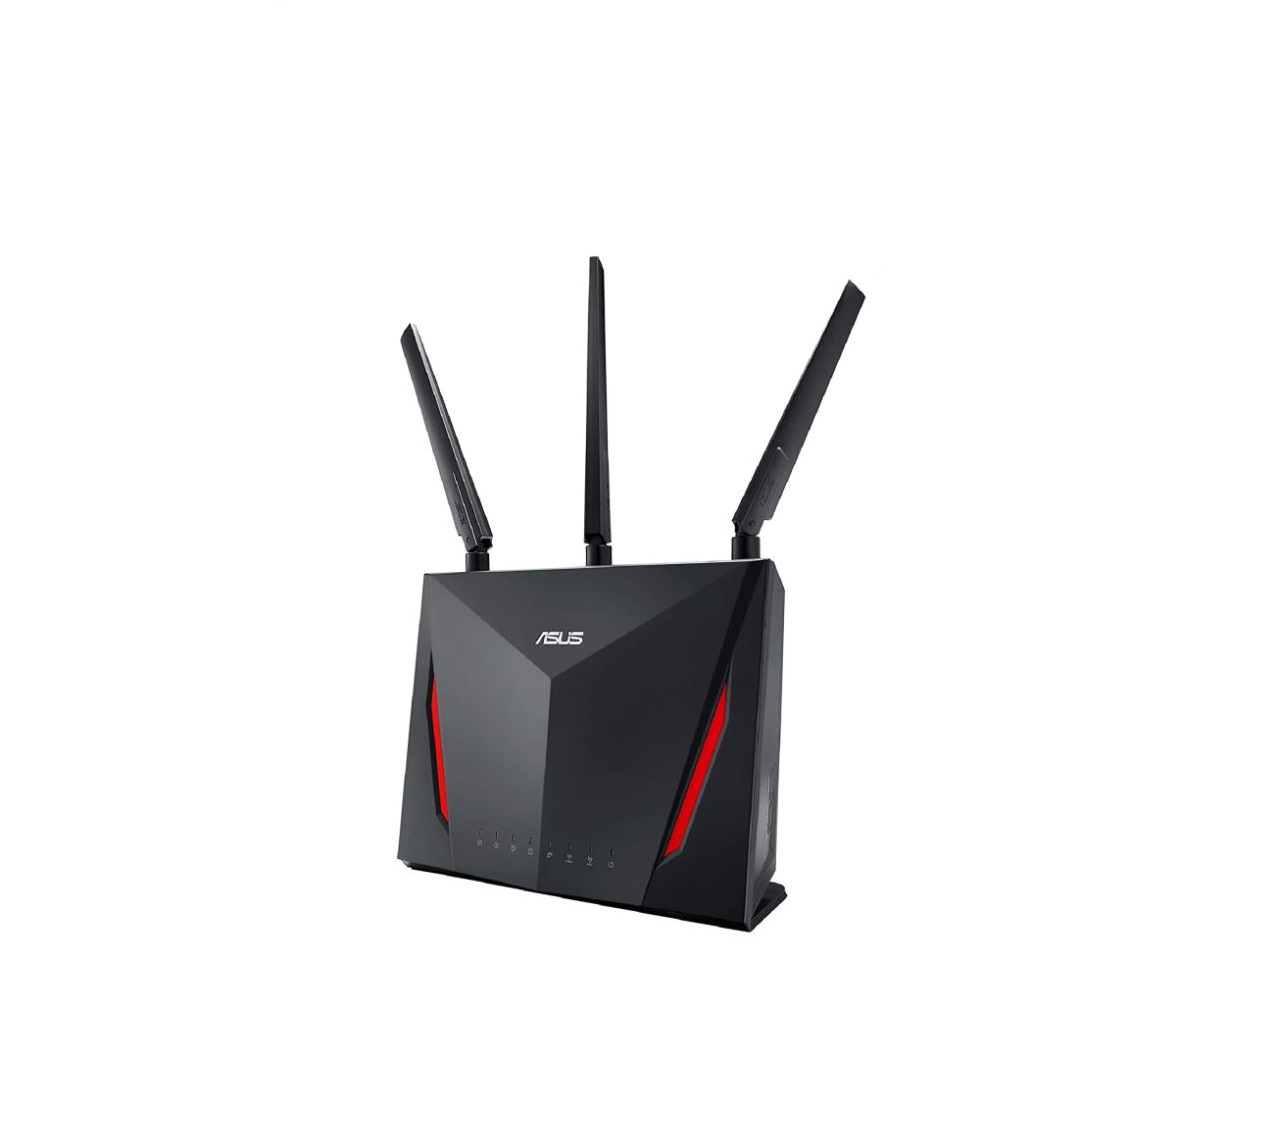 ASUS Wireless-AC2900 Dual band Gigabit Router User Guide